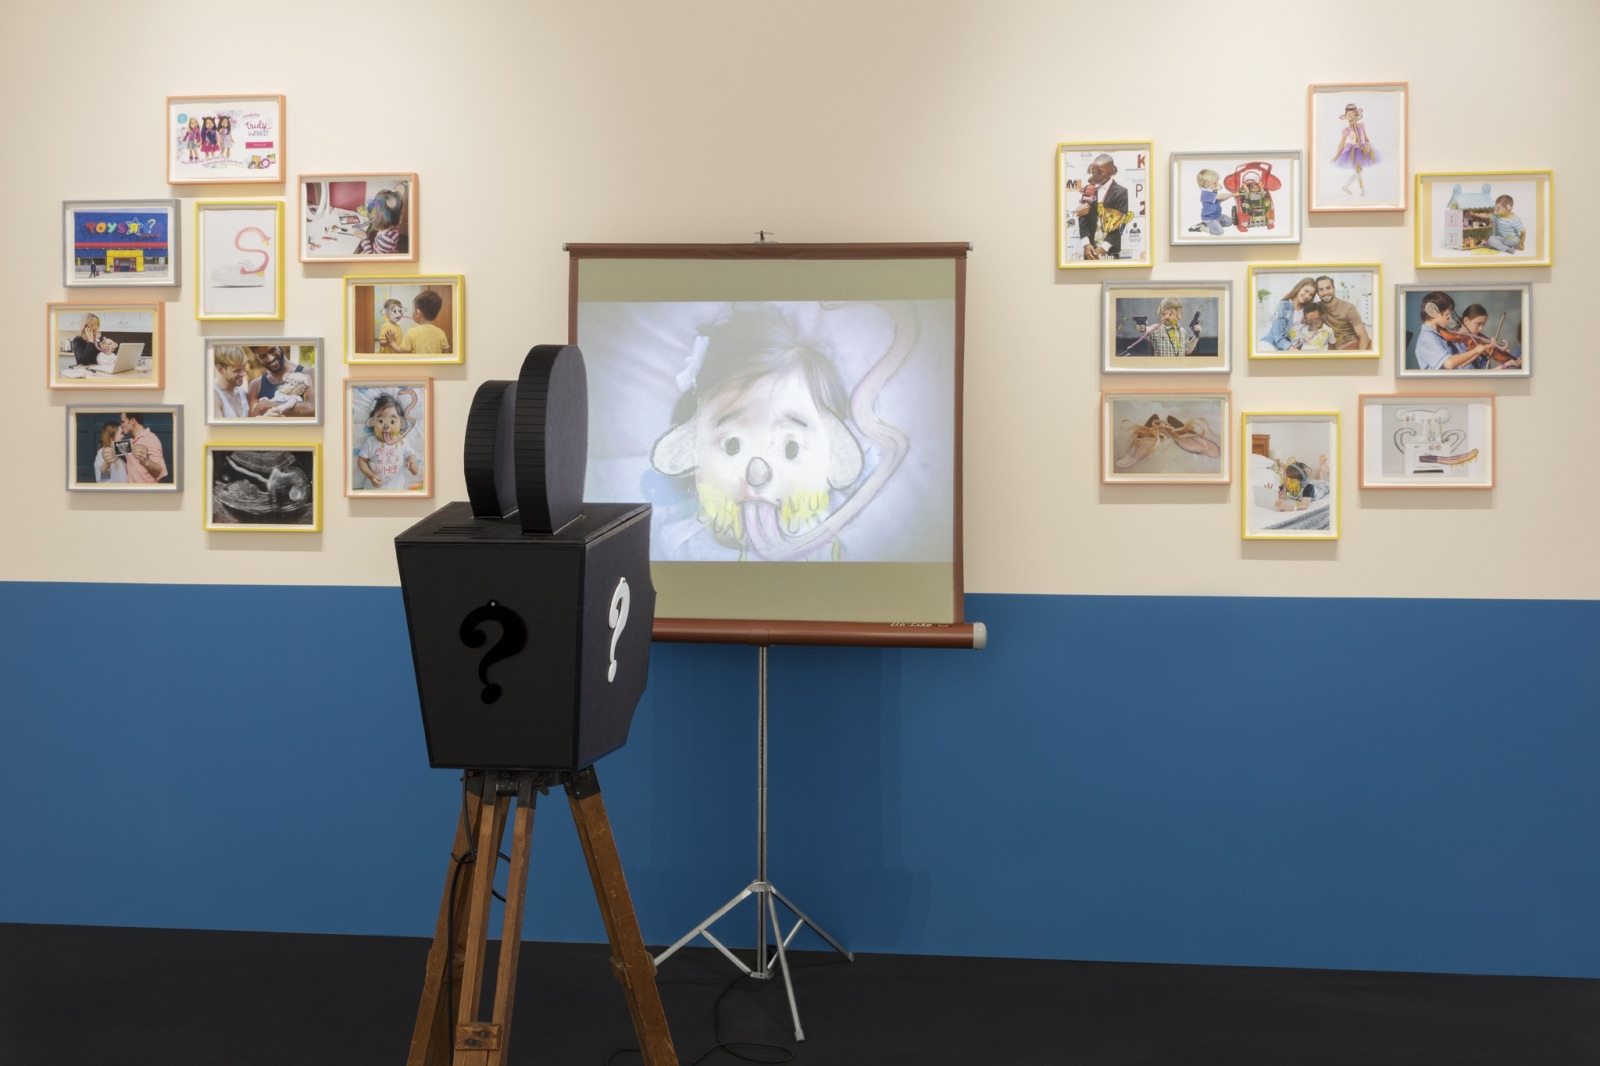 <div class="image_caption_container"><div class="image_caption"><p class="image_caption">Who's Childhood?, 2021, sculptural video installation (cardboard, electrical tape, Plexiglas, antique tripod, projector, projection screen, animation, color, sound), 20 frames: pastel, pencil and inkjet print on paper, 164 x 73 x 73 cm (64 5/8 x 28 3/4 x 28 3/4 in) (projector on tripod), duration: 2:27 min, 24,5 x 33,2 x 3,3 cm (9 5/8 x 13 1/8 x 1 1/4 in) each (15 parts, framed), 33,2 x 24,5 x 3,3 cm (13 1/8 x 9 5/8 x 1 1/4 in) each (5 parts, framed), variable edition of 3 (SF 128). Exhibition view: Simon Fujiwara, Once Upon a Who?, Esther Schipper, Berlin (2022). Photo © Andrea Rossetti</p></div></div>